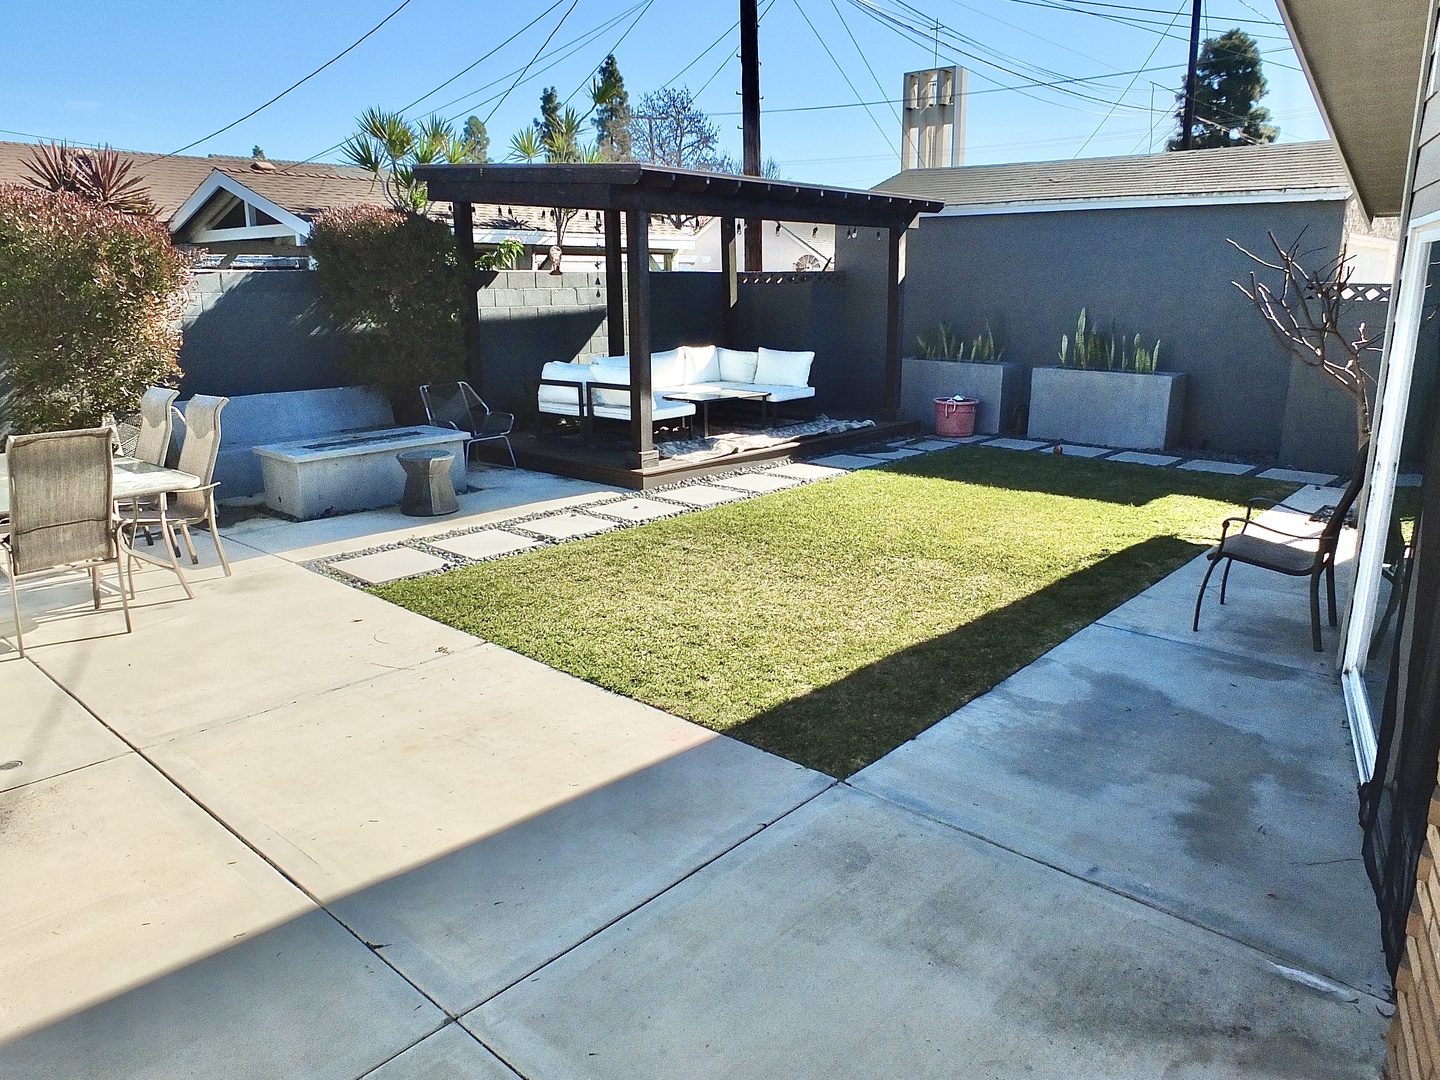 Savor family meals and play games in the spacious yard